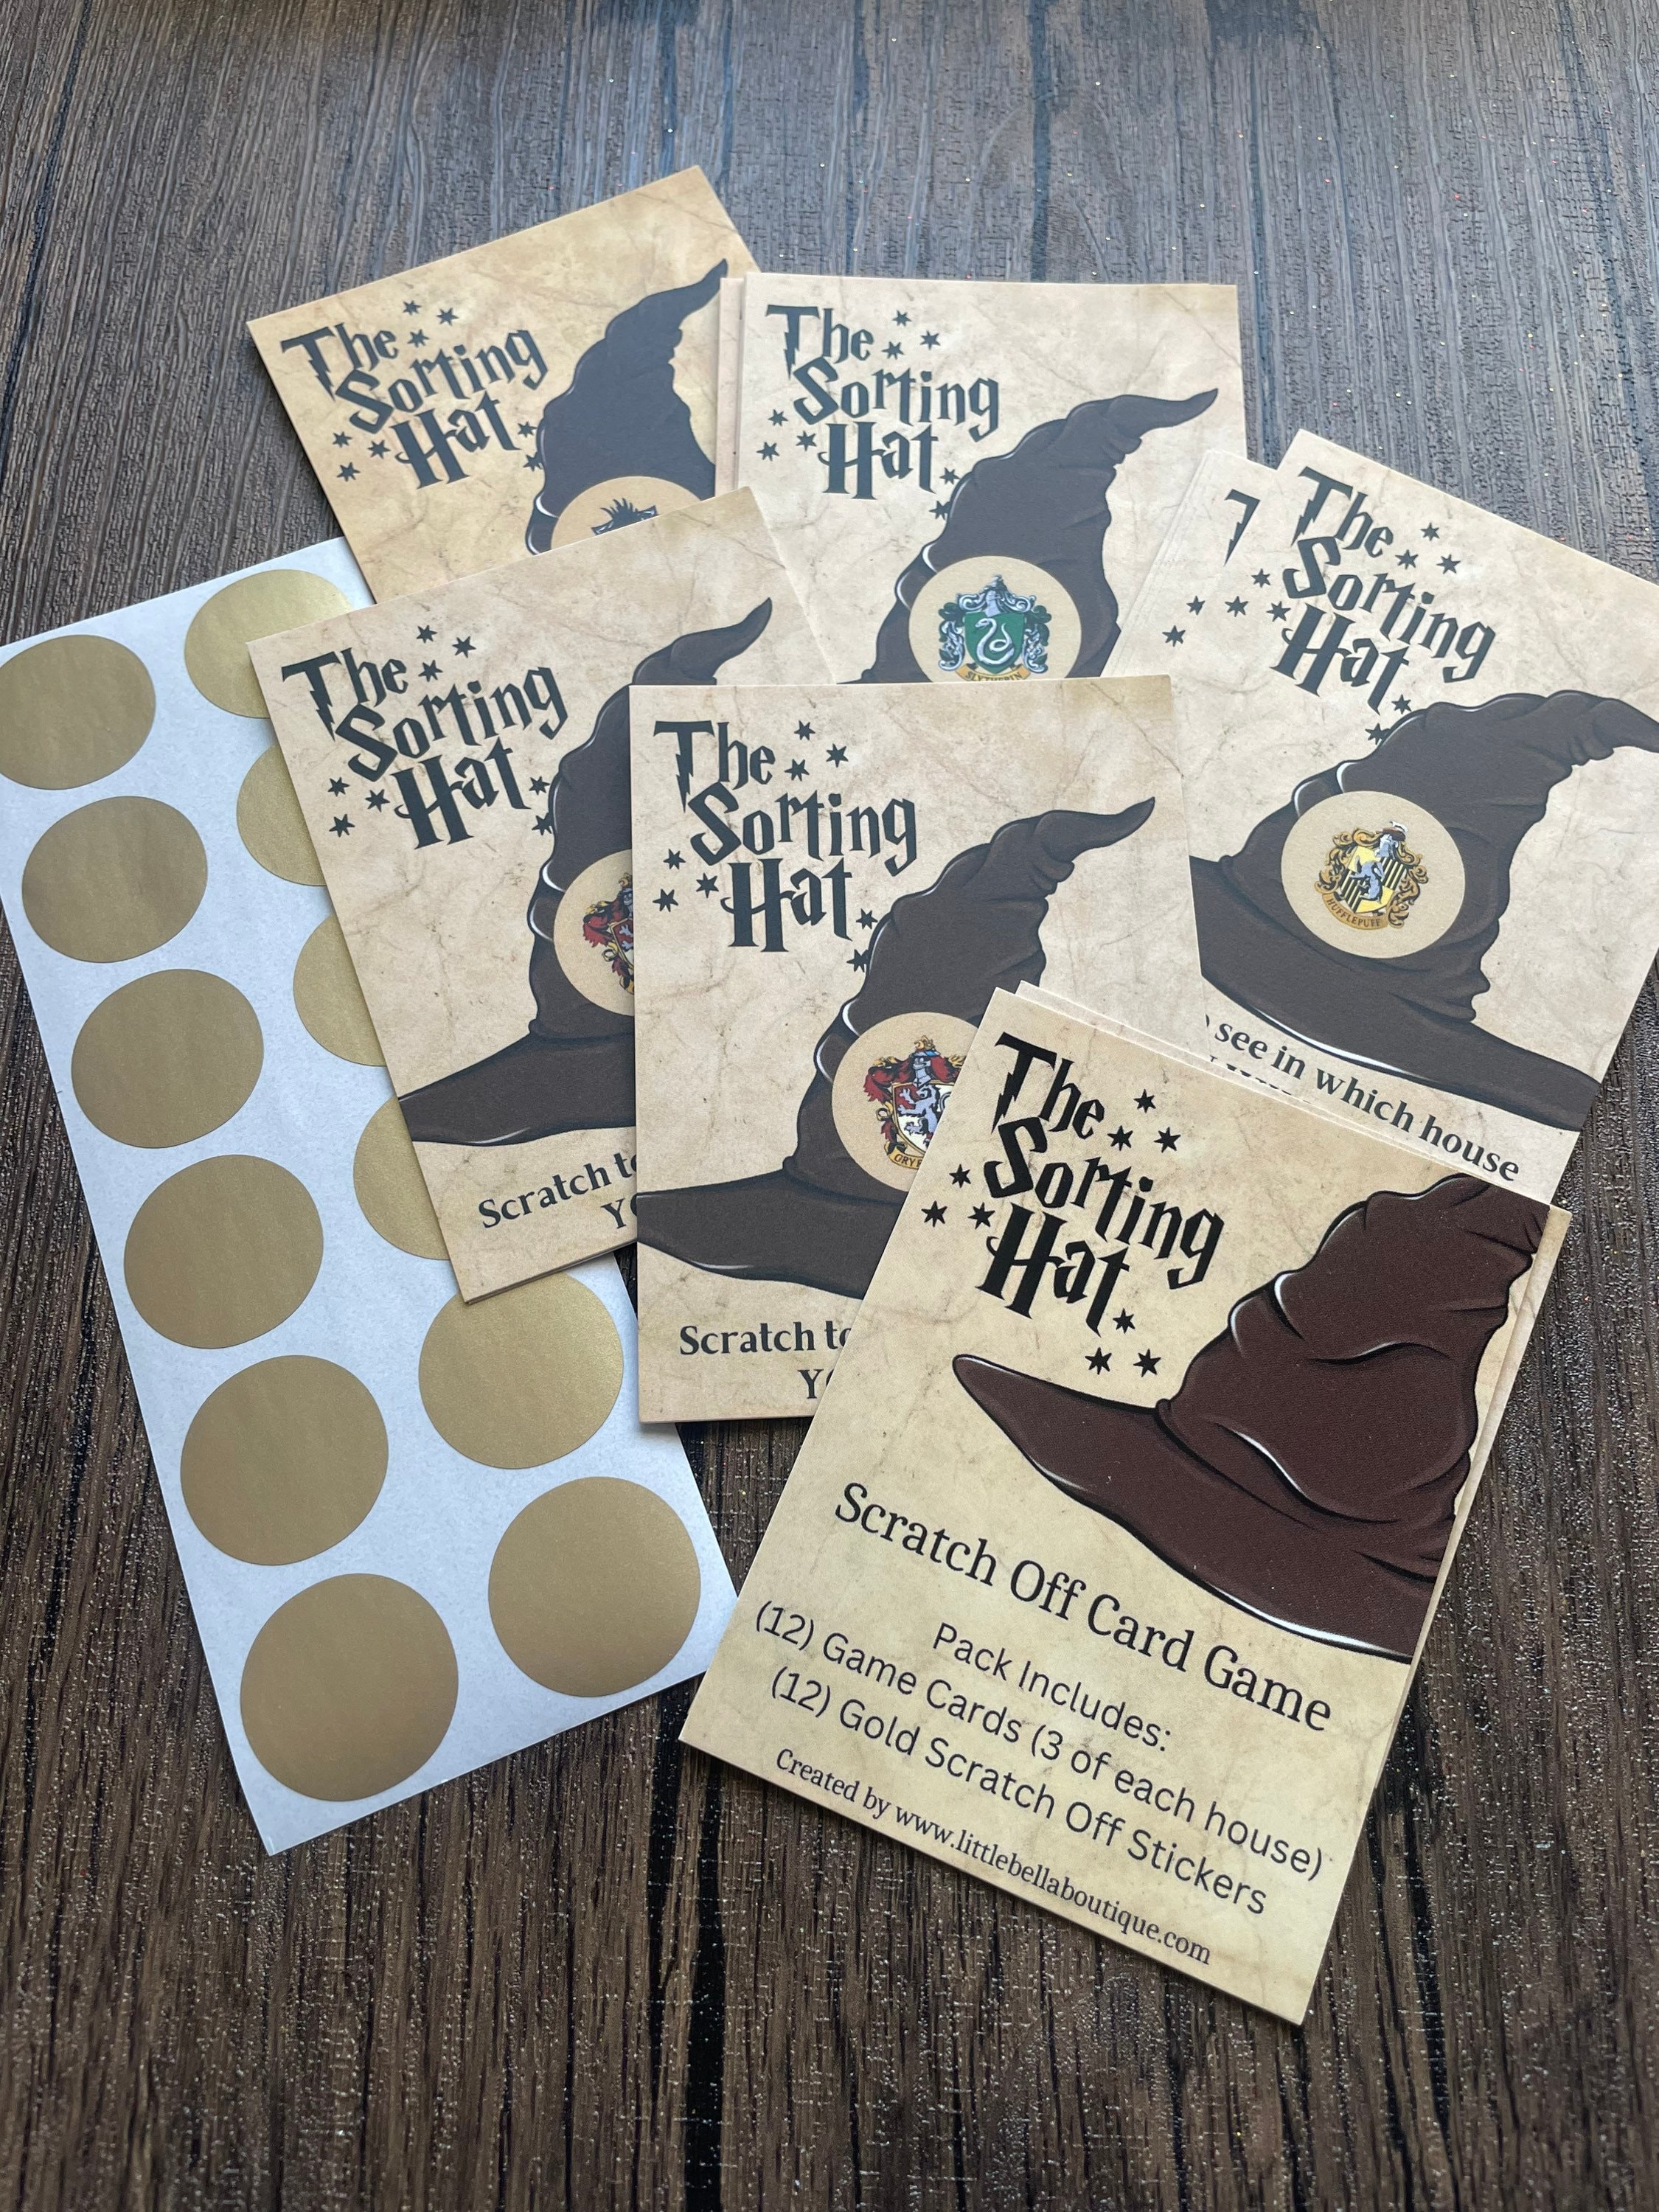 Review & Giveaway: Win a Copy of Harry Potter: Spells & Charms: A